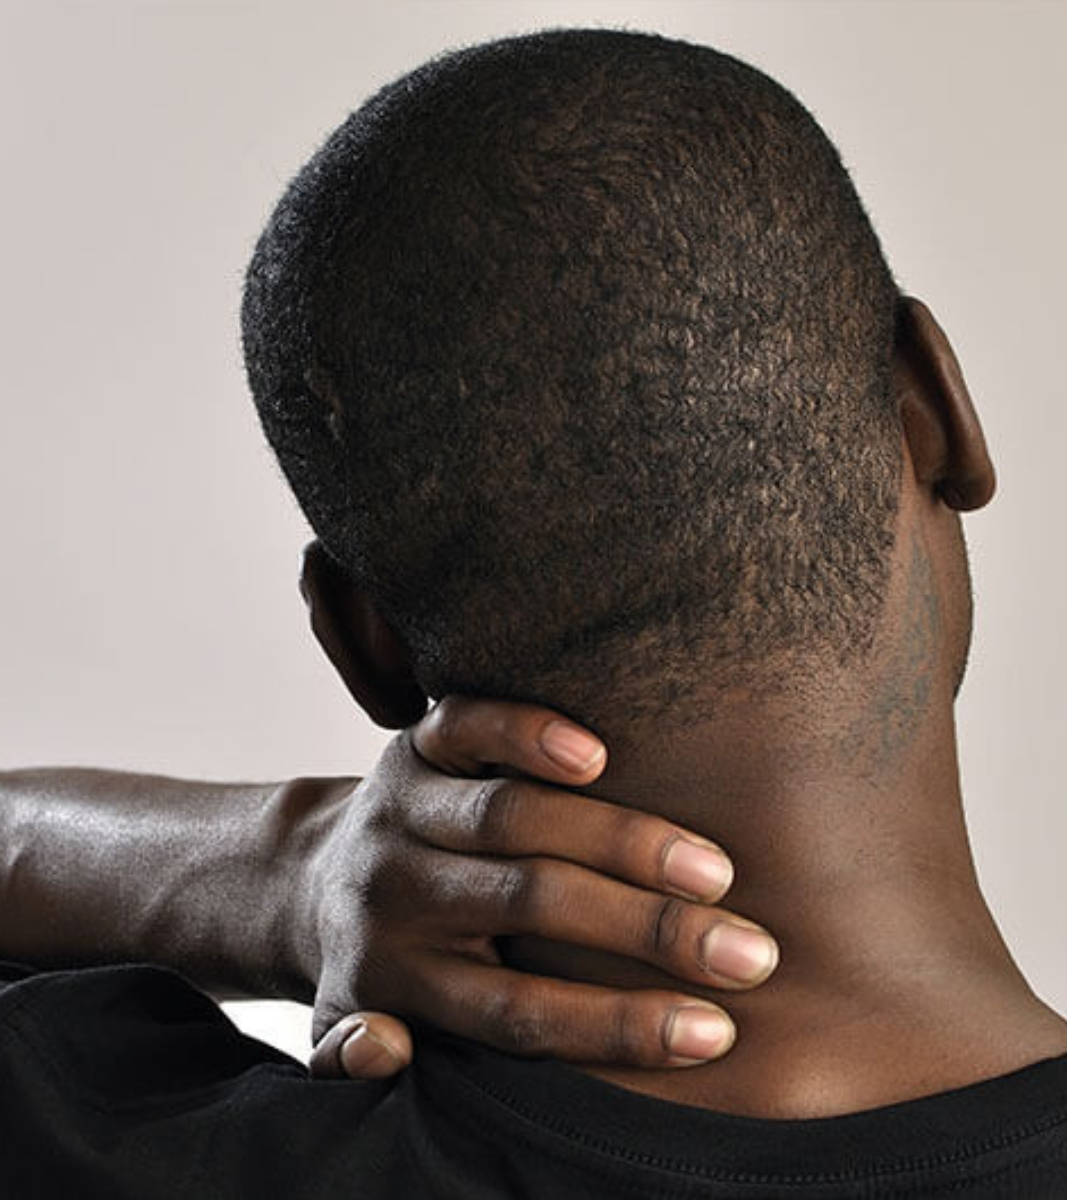 neck sprain treatment in kenya,nairobi spine and orthopaedic centre,neck specialists in kenya